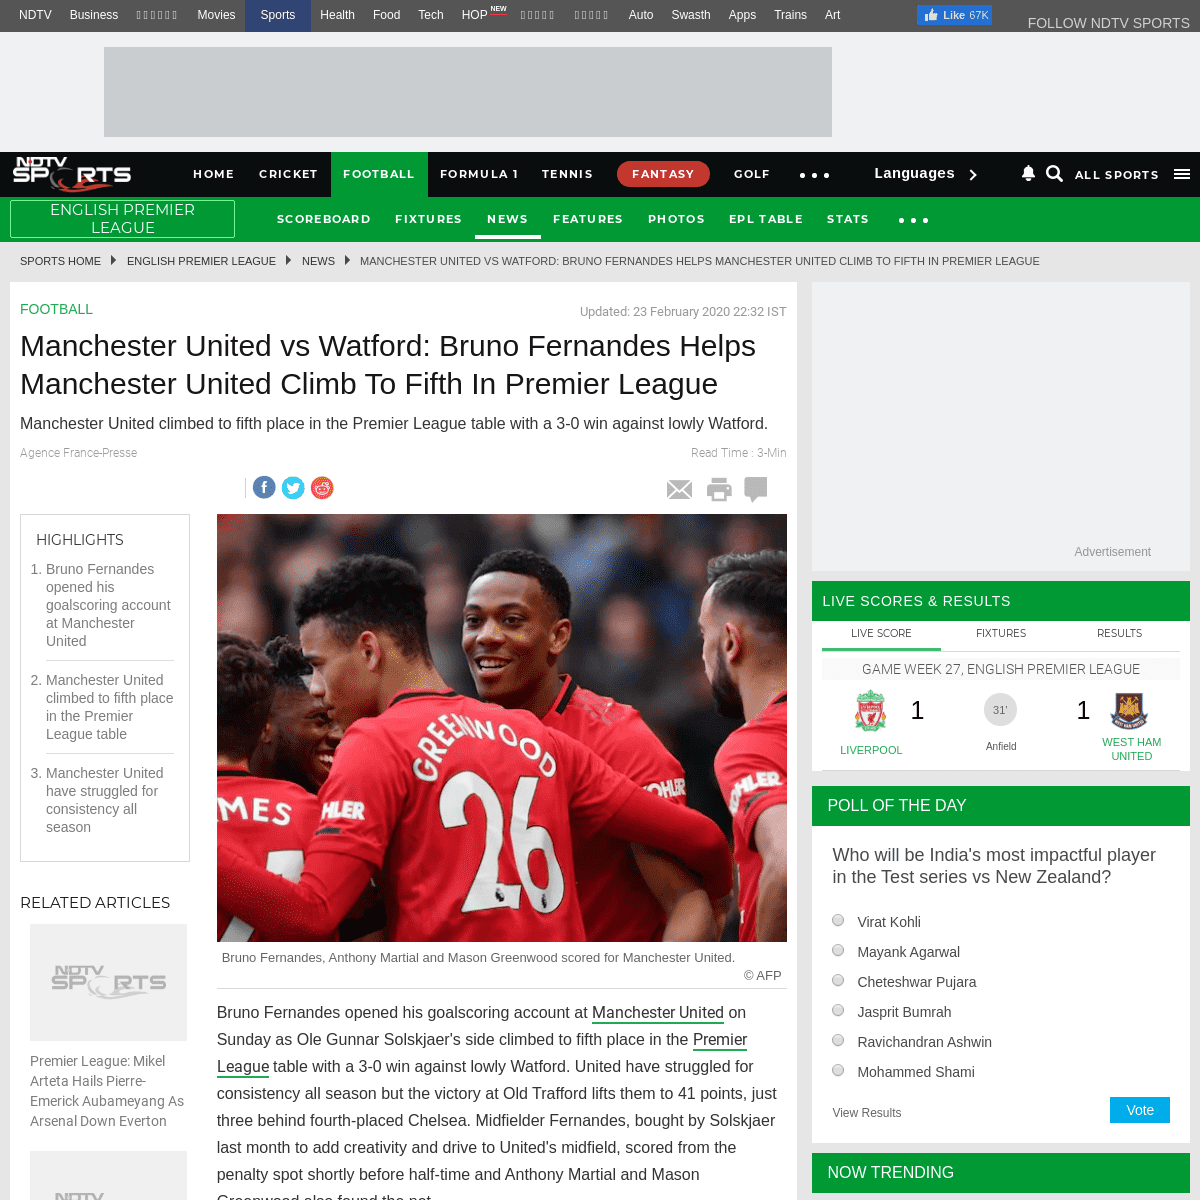 A complete backup of sports.ndtv.com/english-premier-league/manchester-united-vs-watford-bruno-fernandes-helps-manchester-united